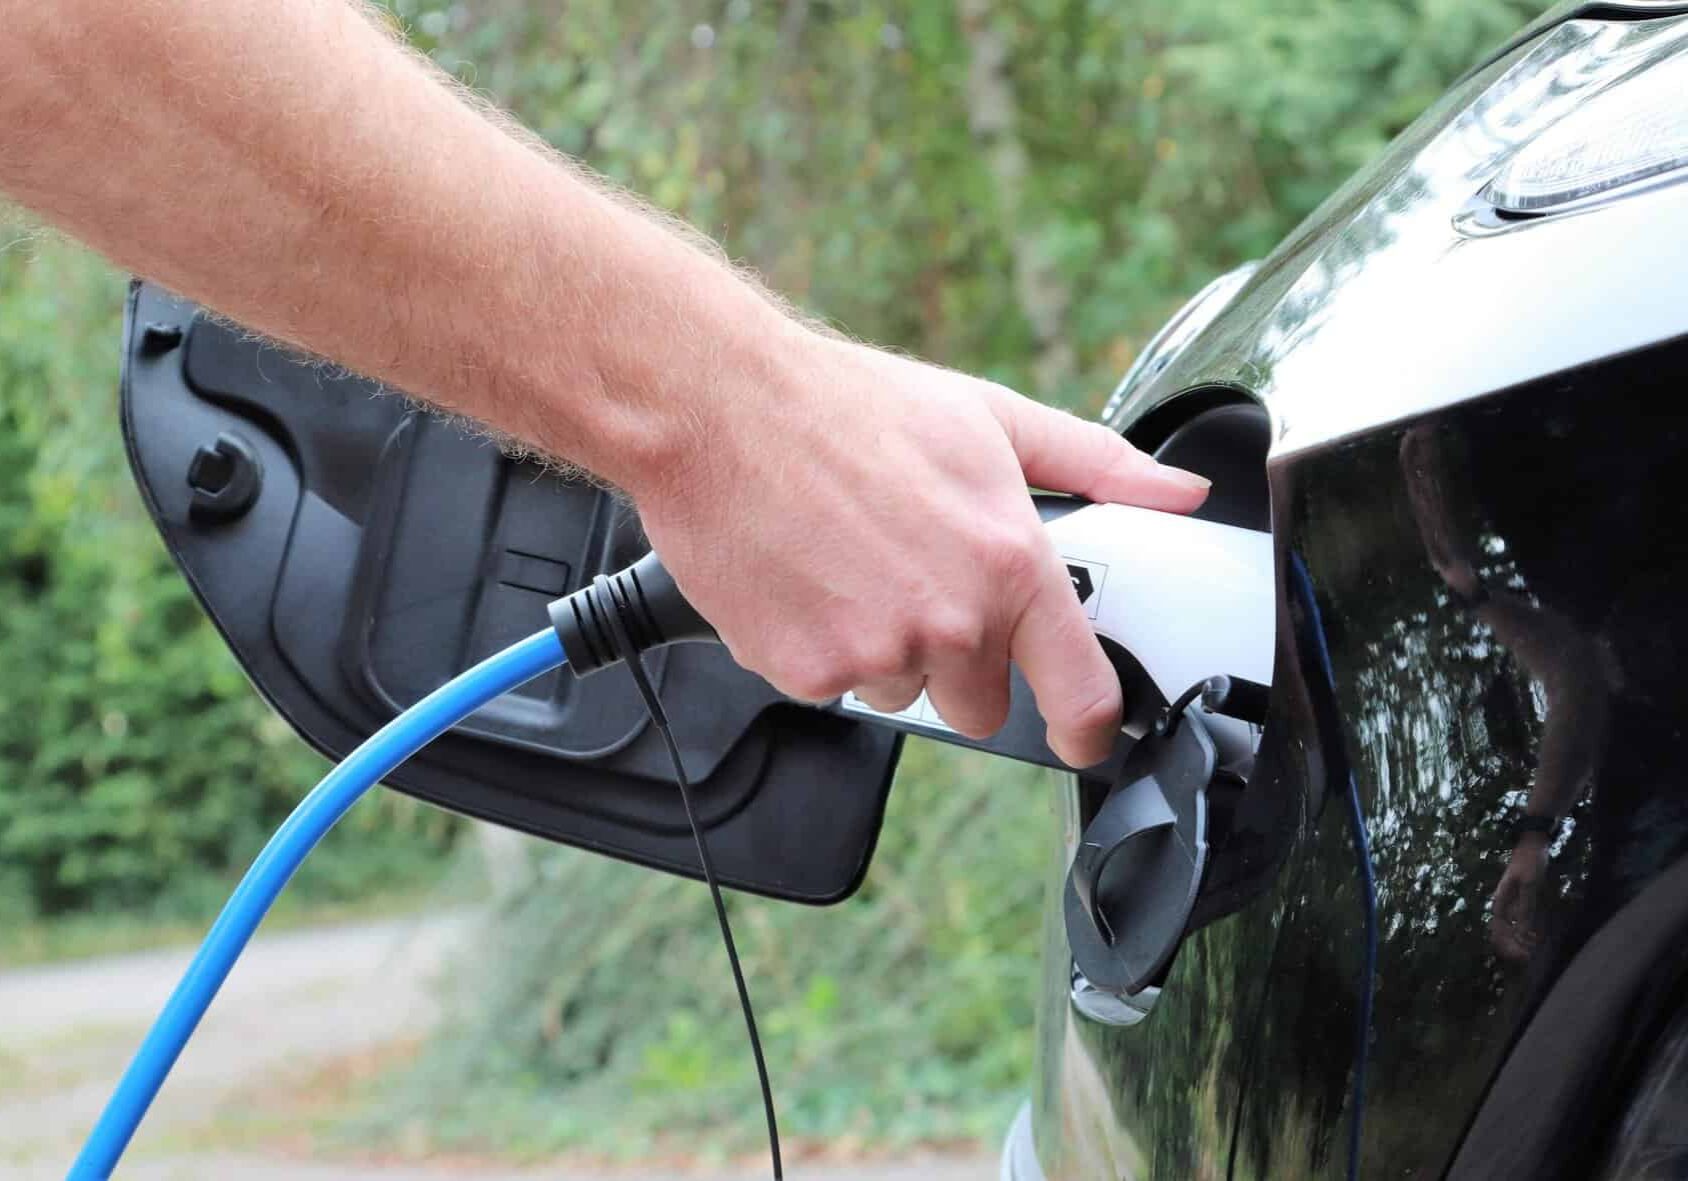 Using a blue cable, a person charges an EV (electric vehicle).